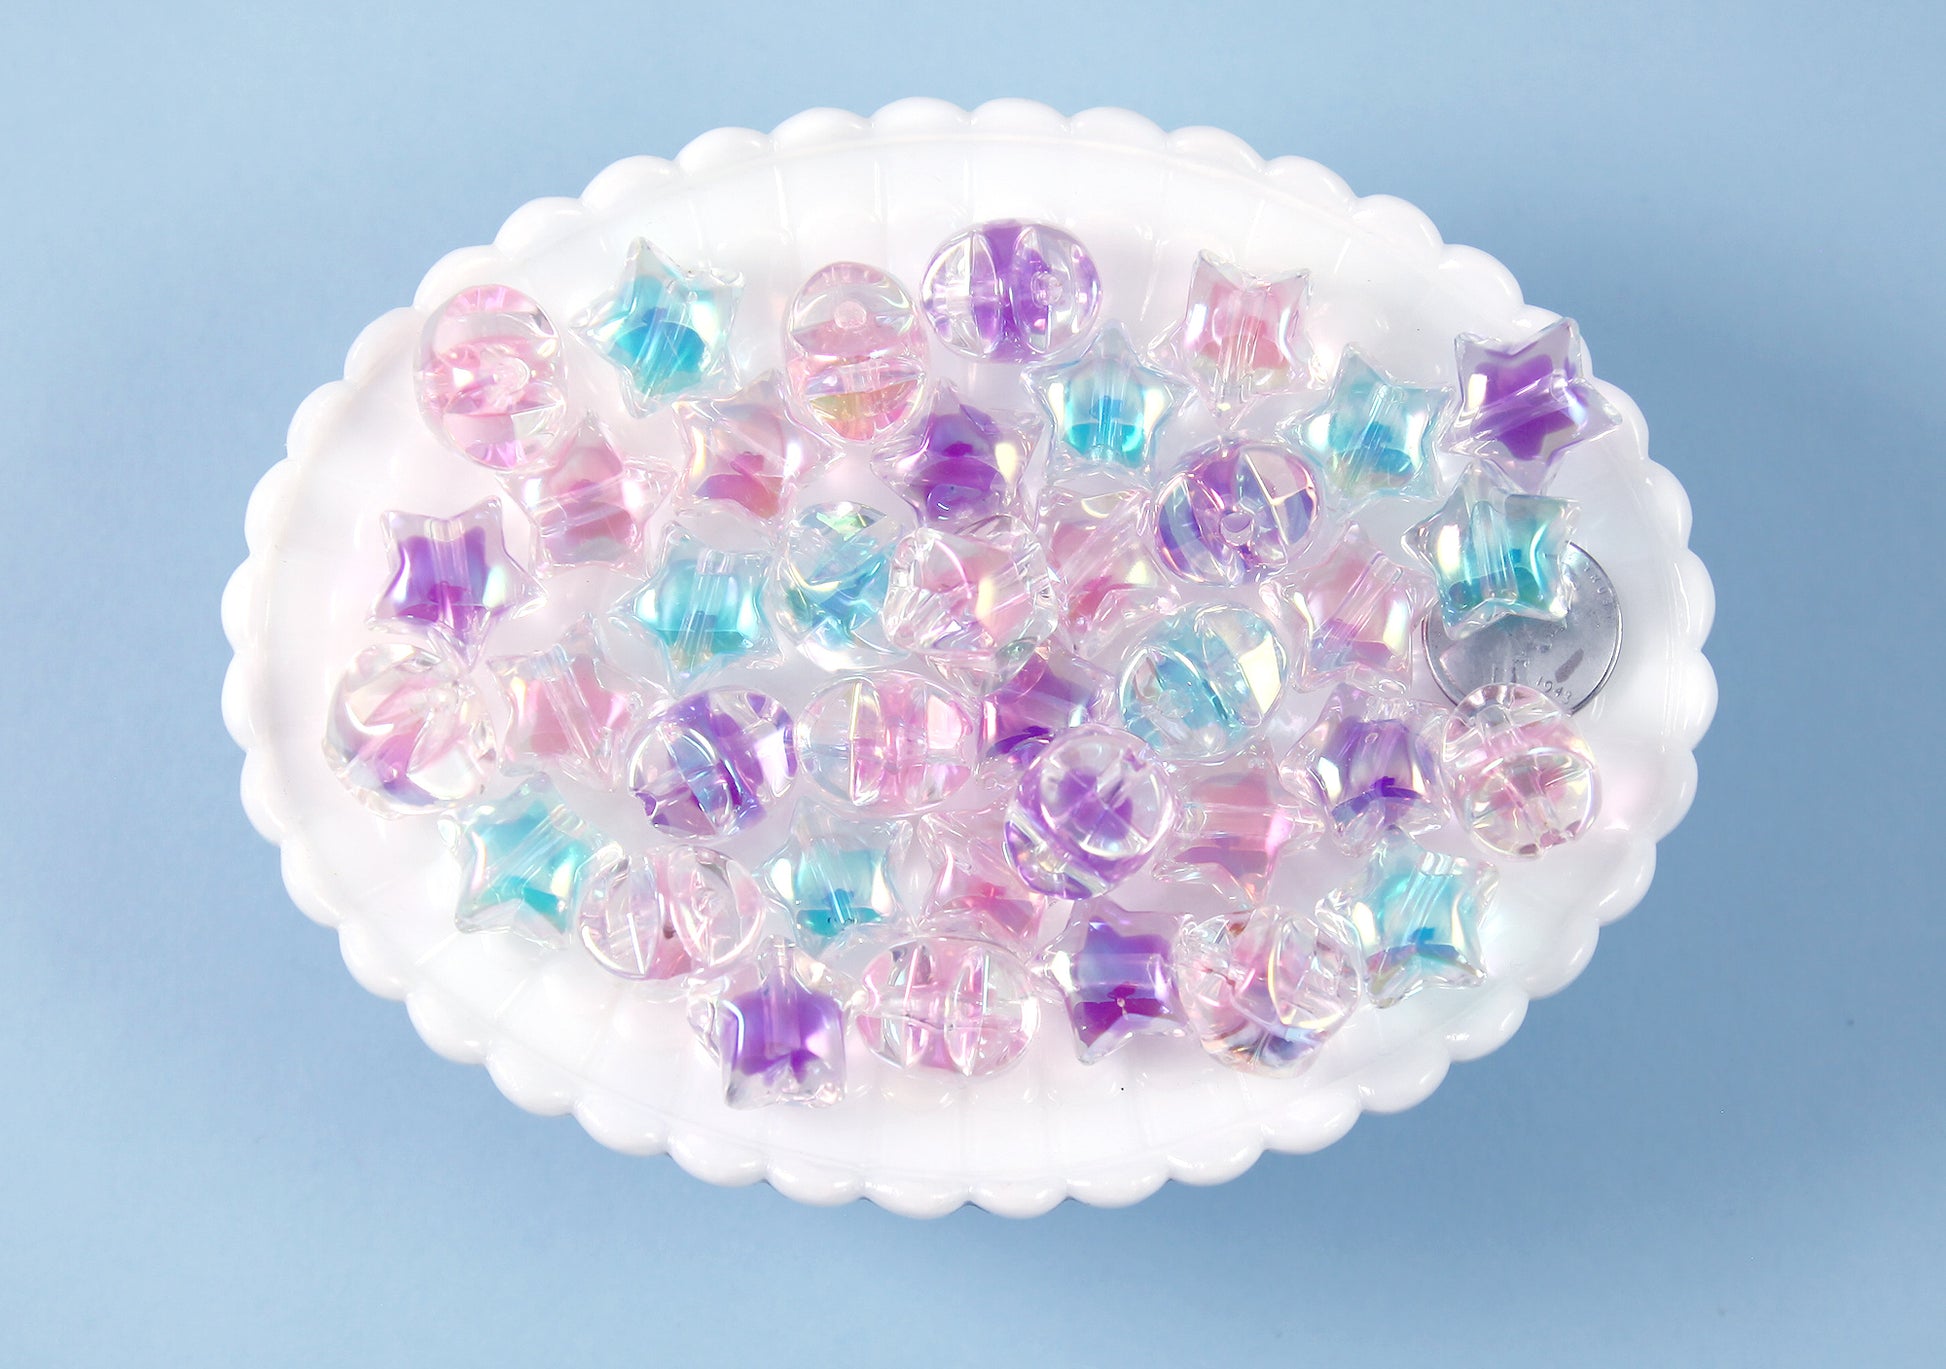 Pastel Star Beads - 15mm Super Cute Pastel Inner Bead Star Resin or Acrylic  Beads - 50 pc set